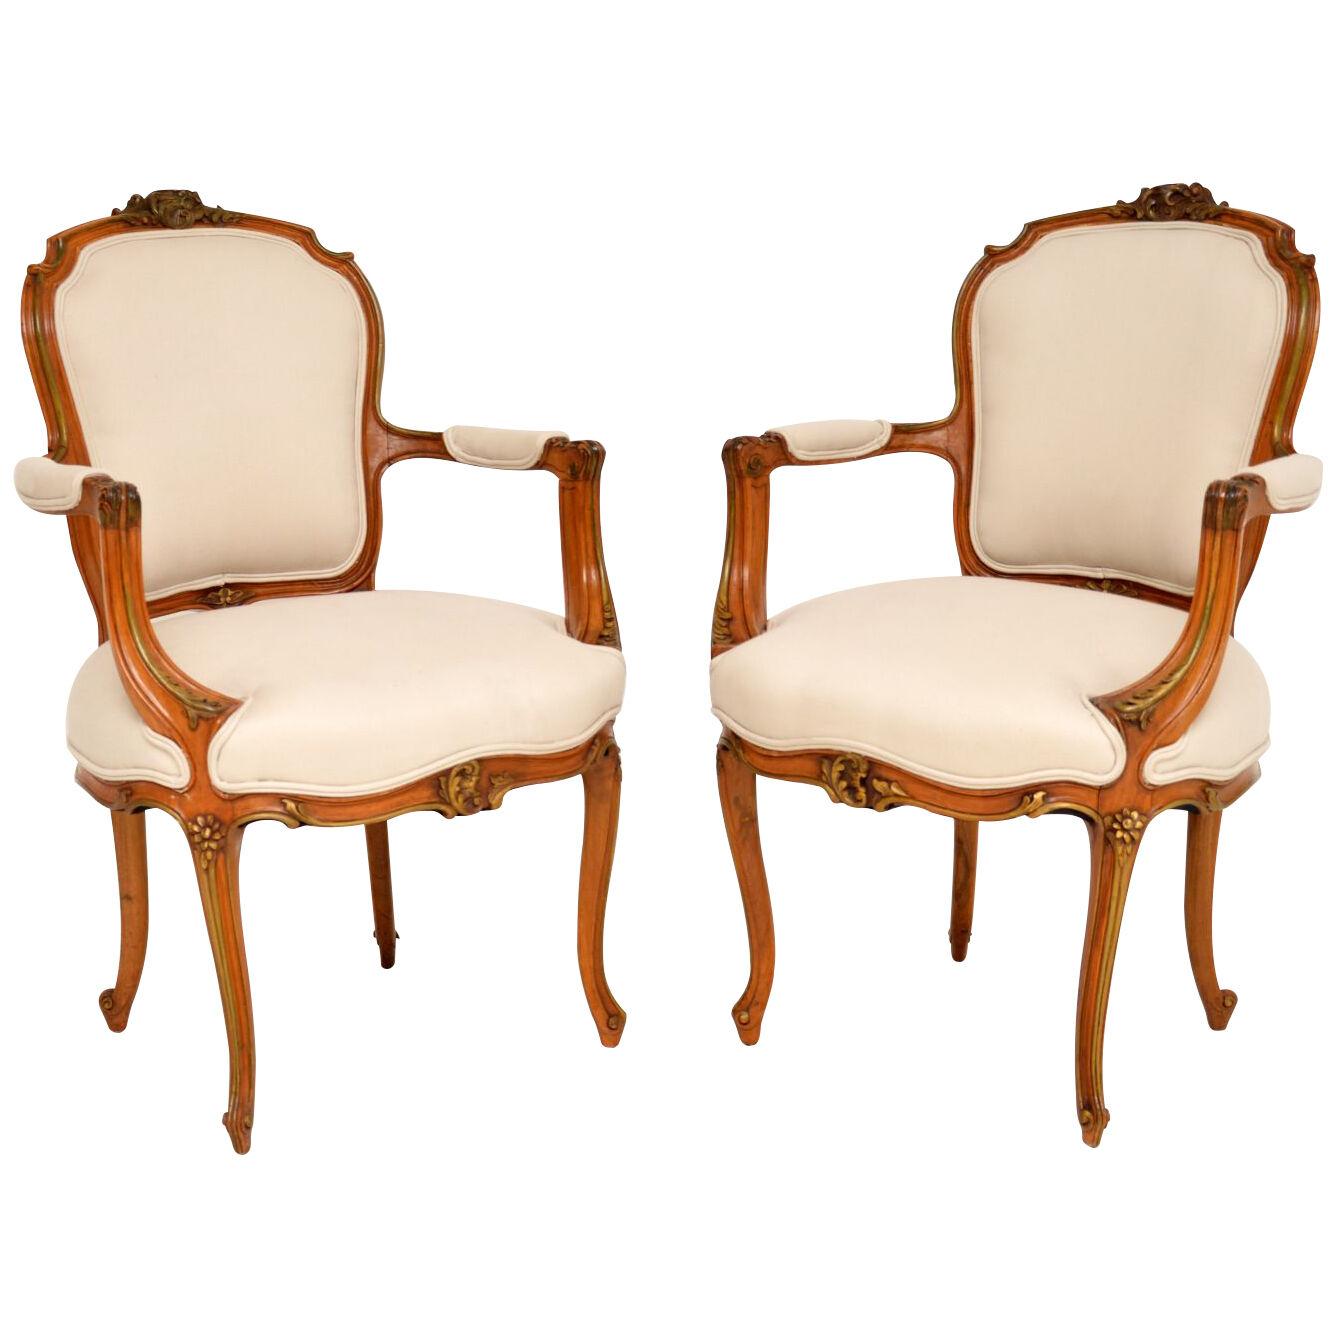 Pair of Antique French Solid Walnut Salon Chairs